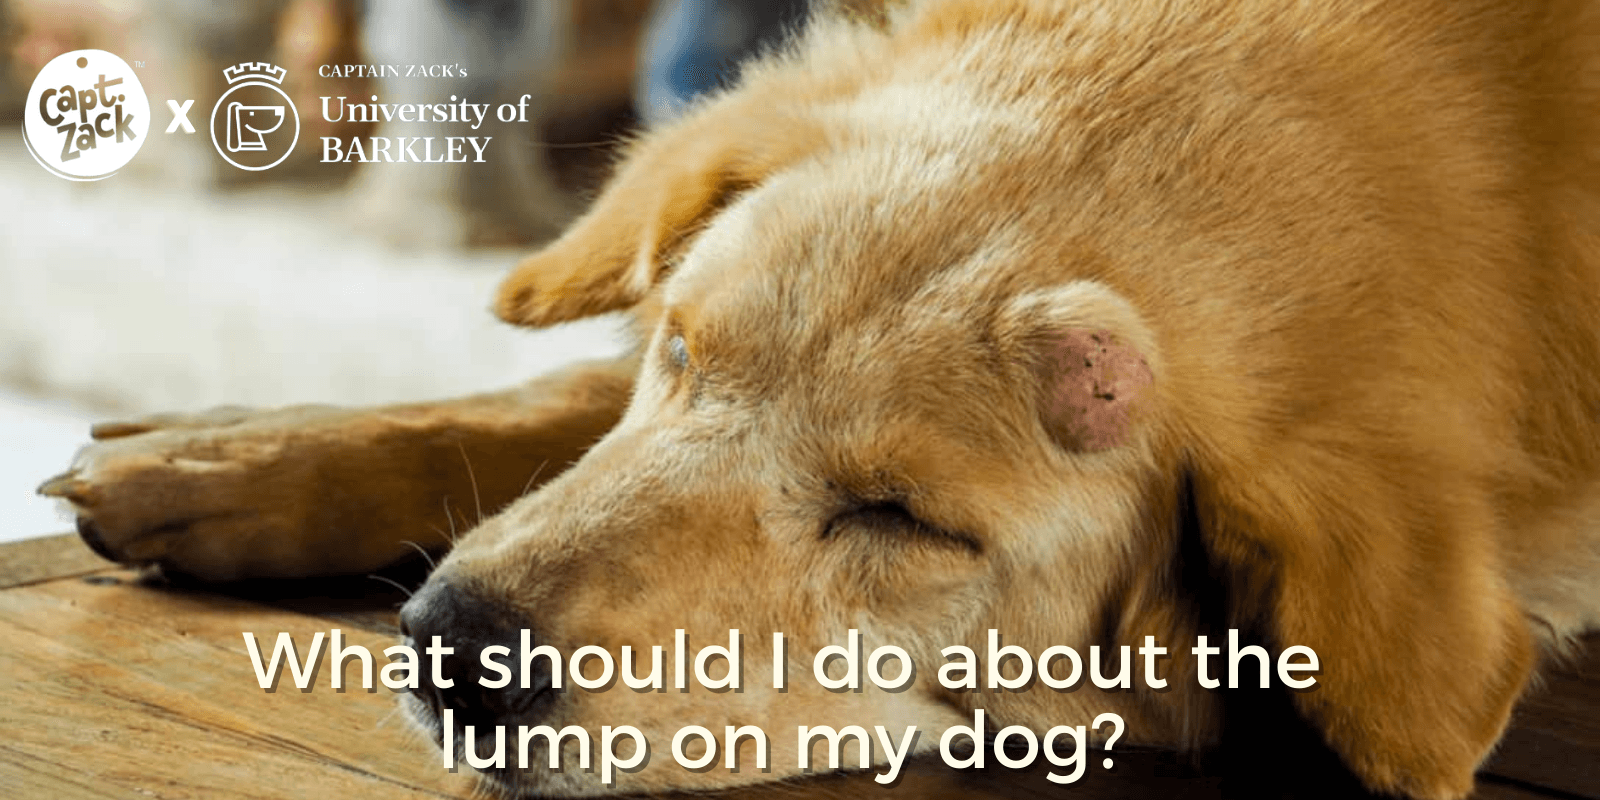 What should I do about the lump on my dog ? - Captain Zack